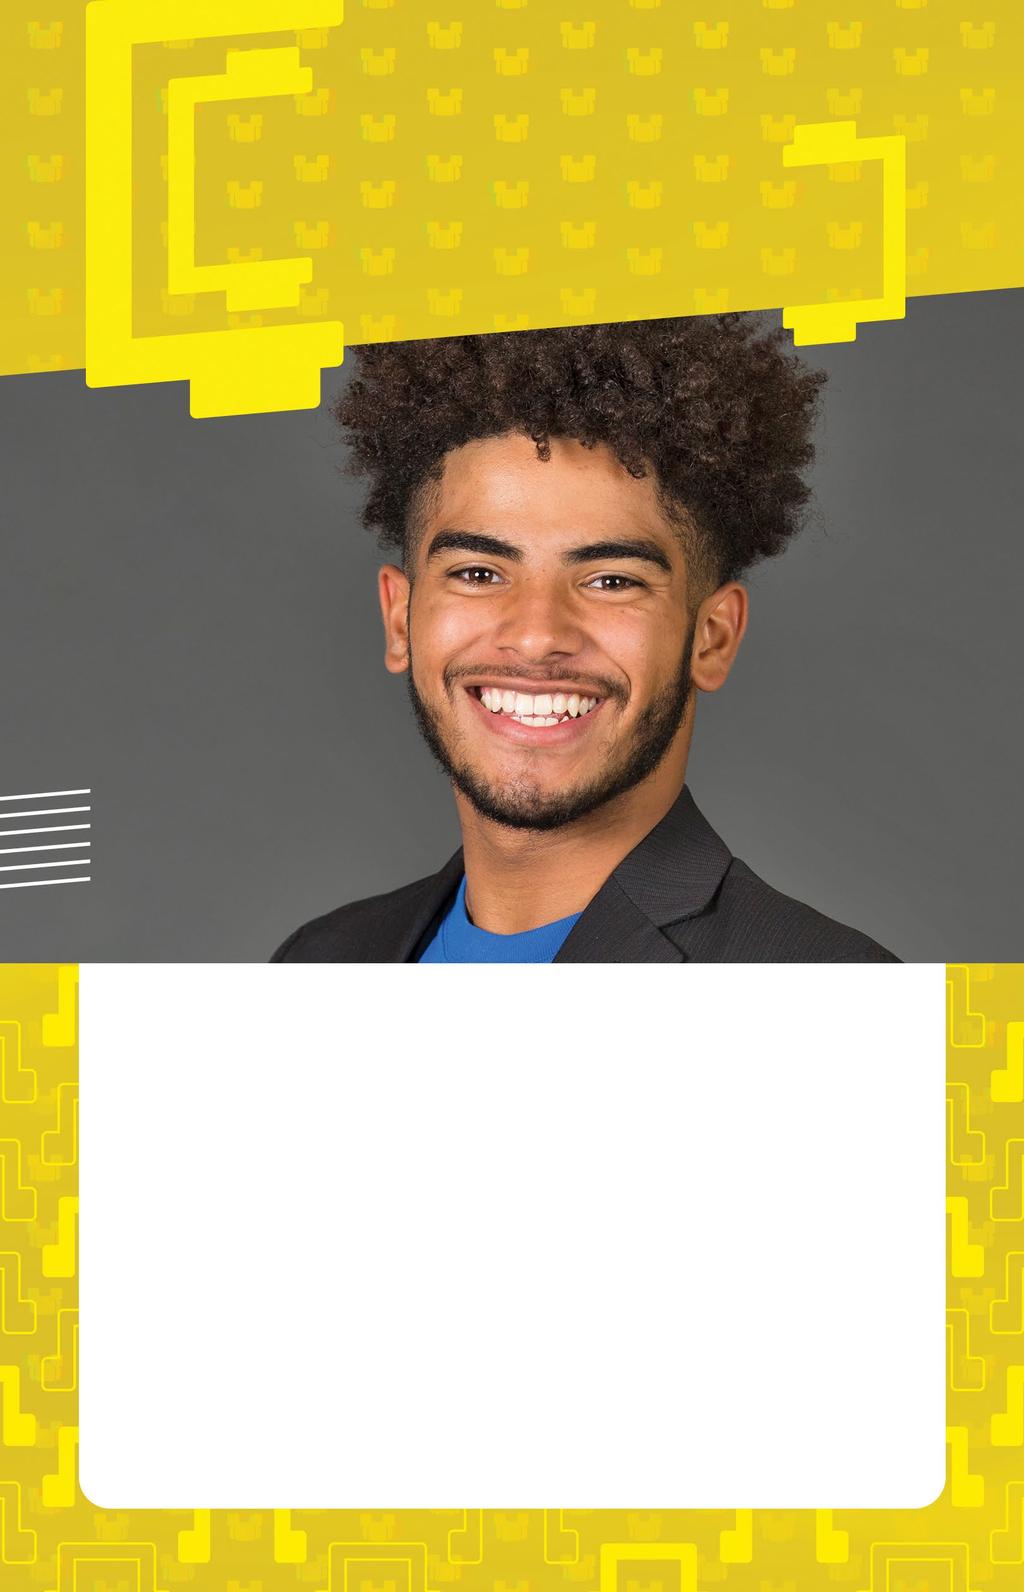 HERO CHANGE FOR CARLOS POLANCO WHAT MAKES CARLOS A HERO FOR CHANGE: Carlos Polanco was named the Youth of the Year by the